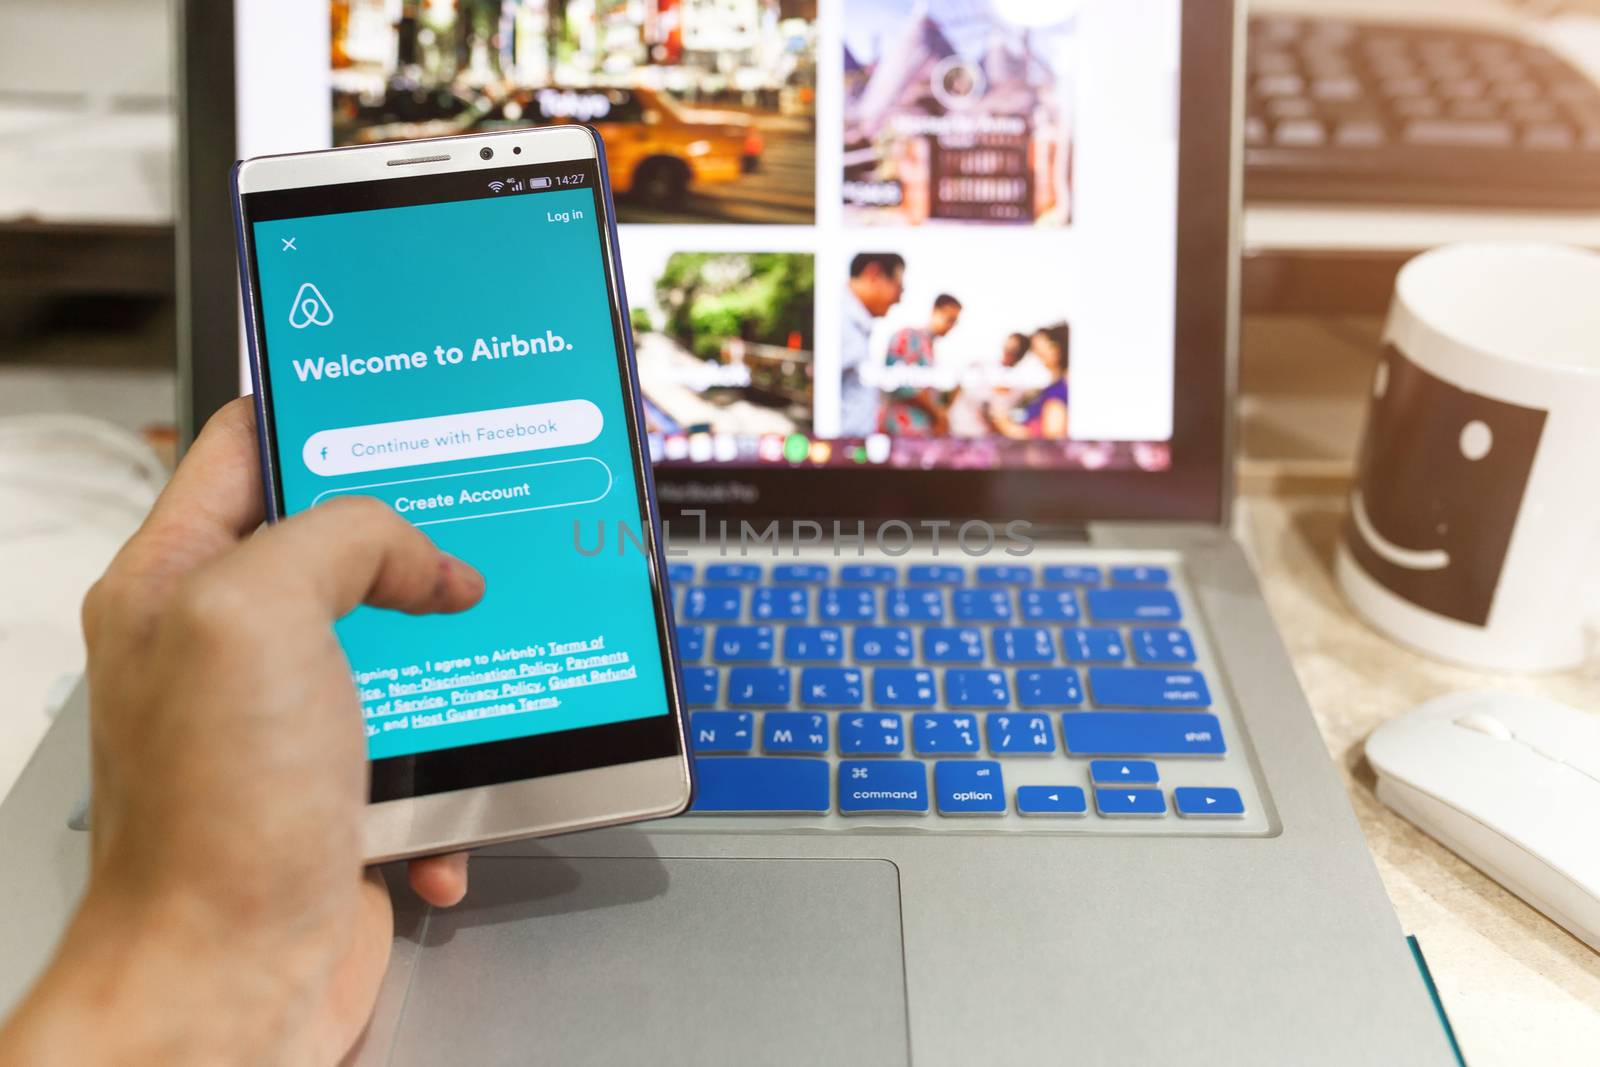 Android device Showing Airbnb application on the screen by nopparats